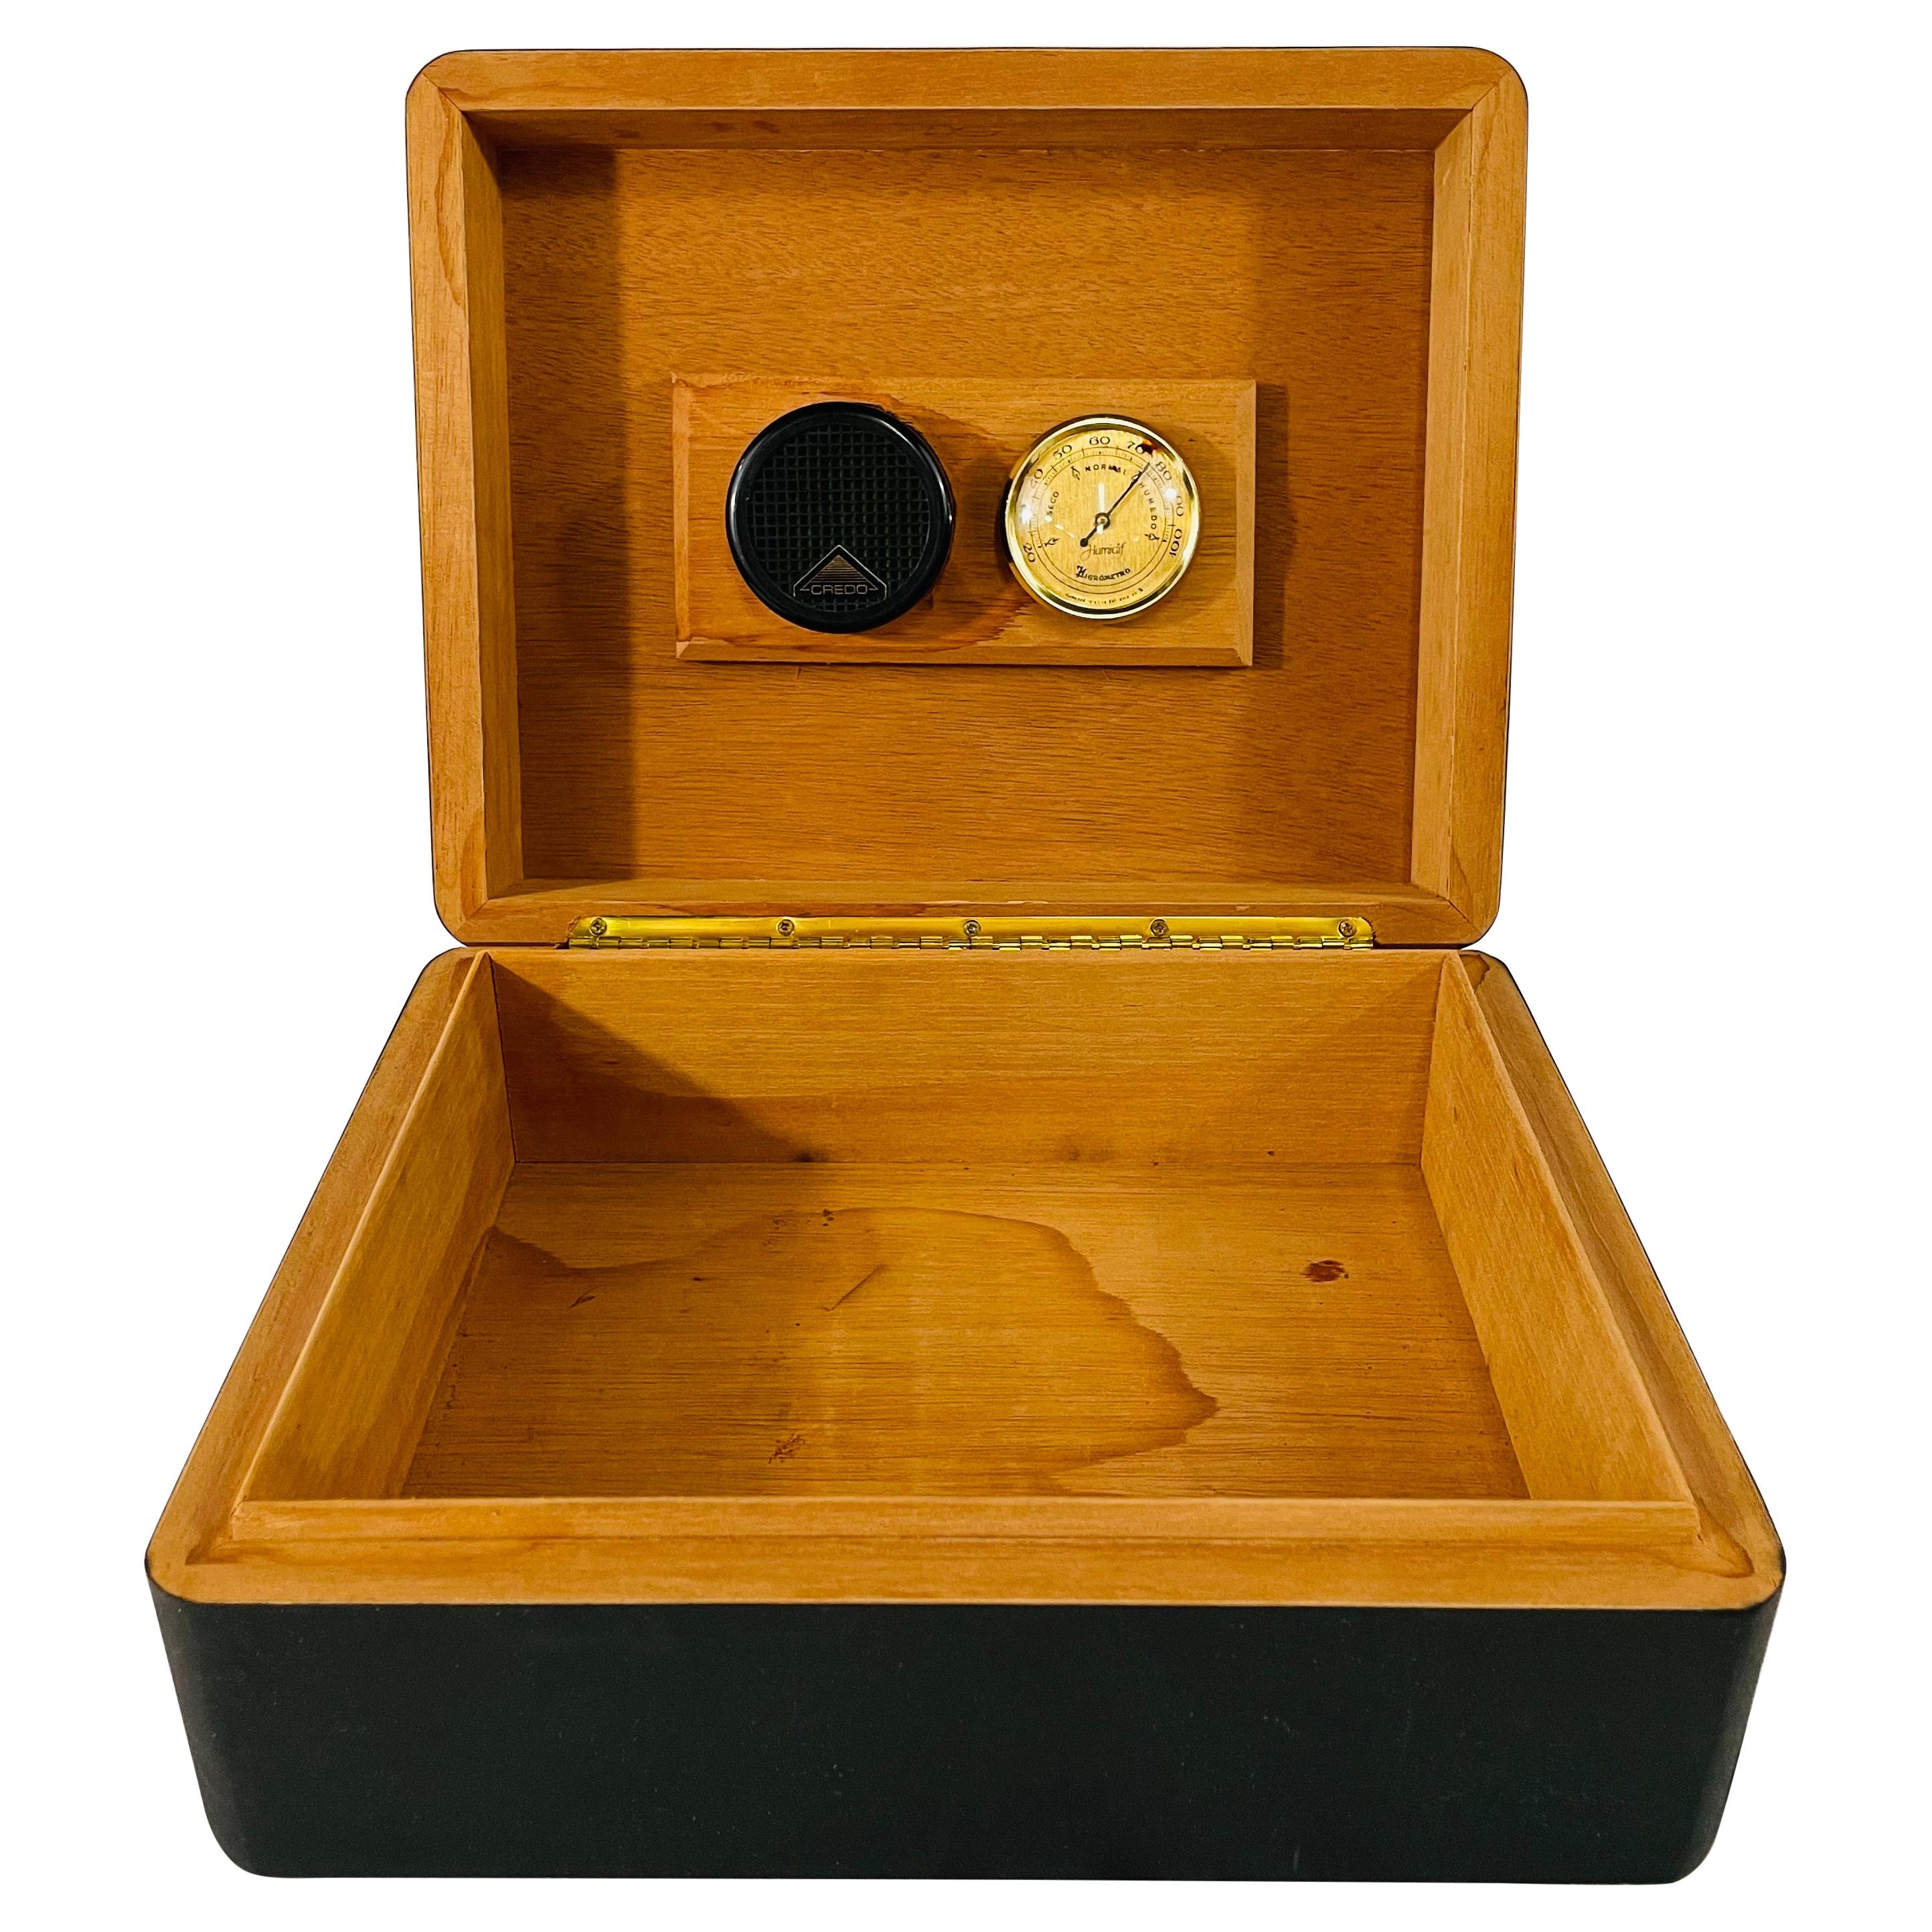 Can a cigar box be used as a humidor?